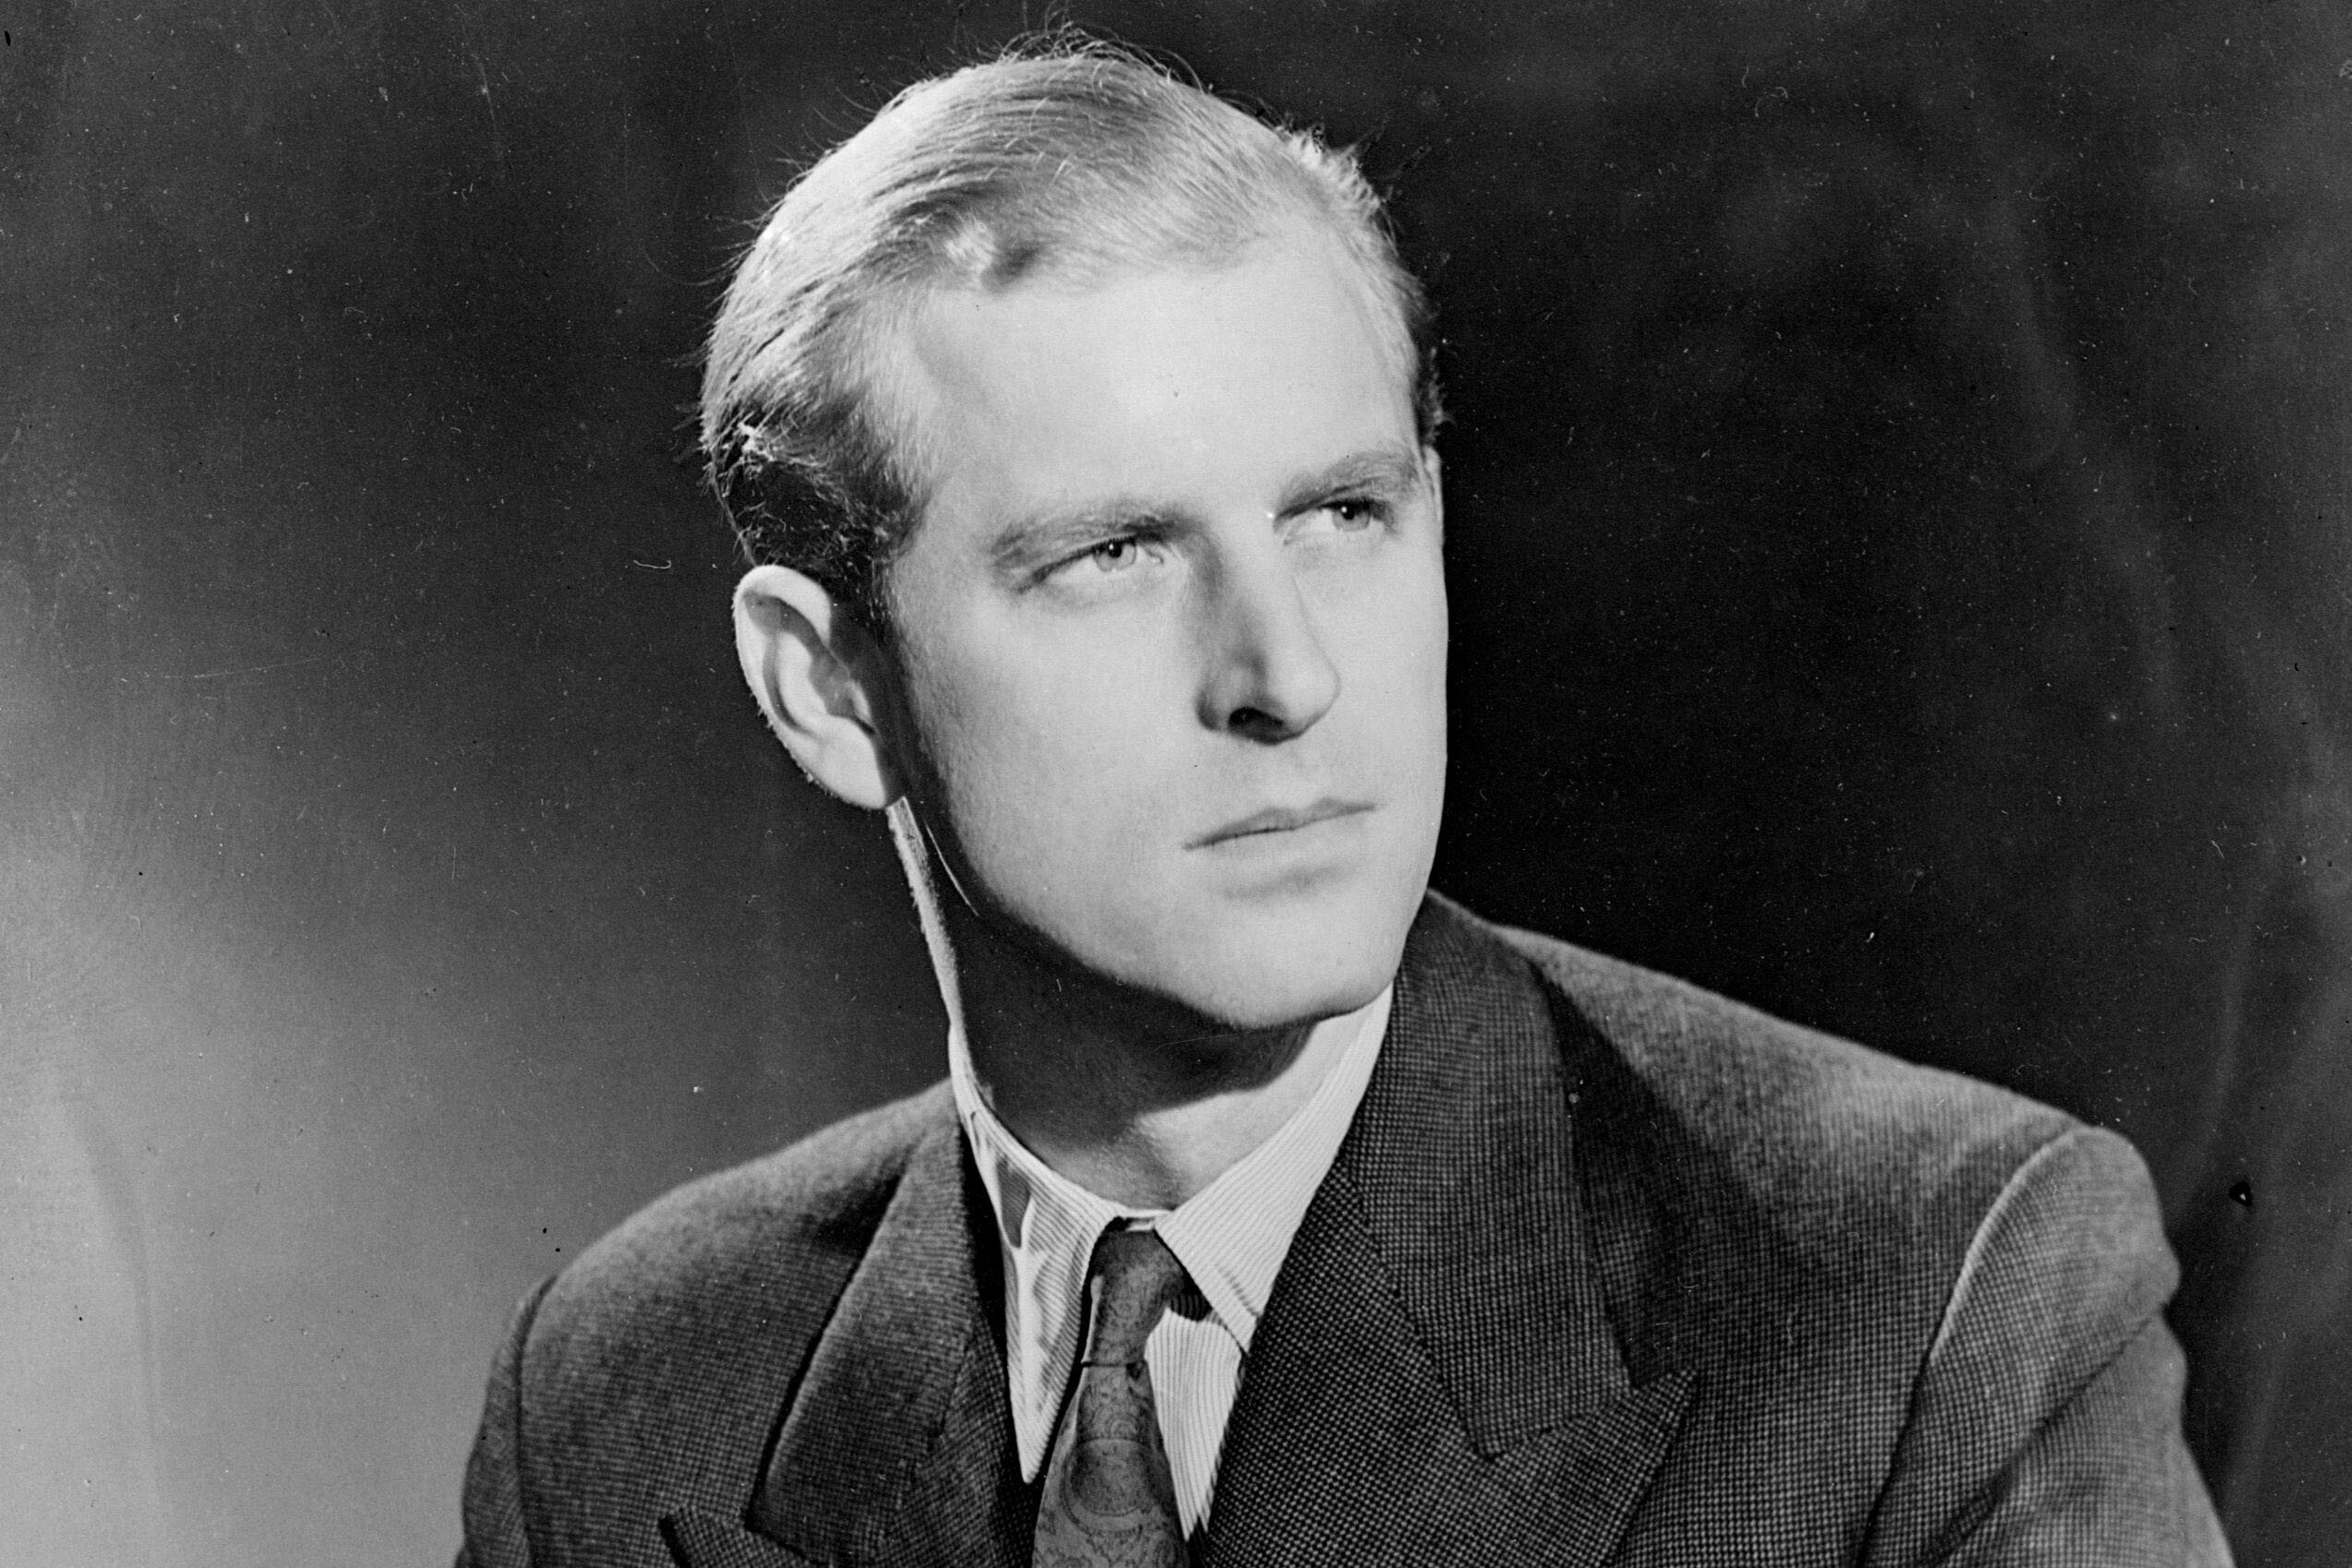 Young Prince Philip Photos Go Viral as People Stunned By ...